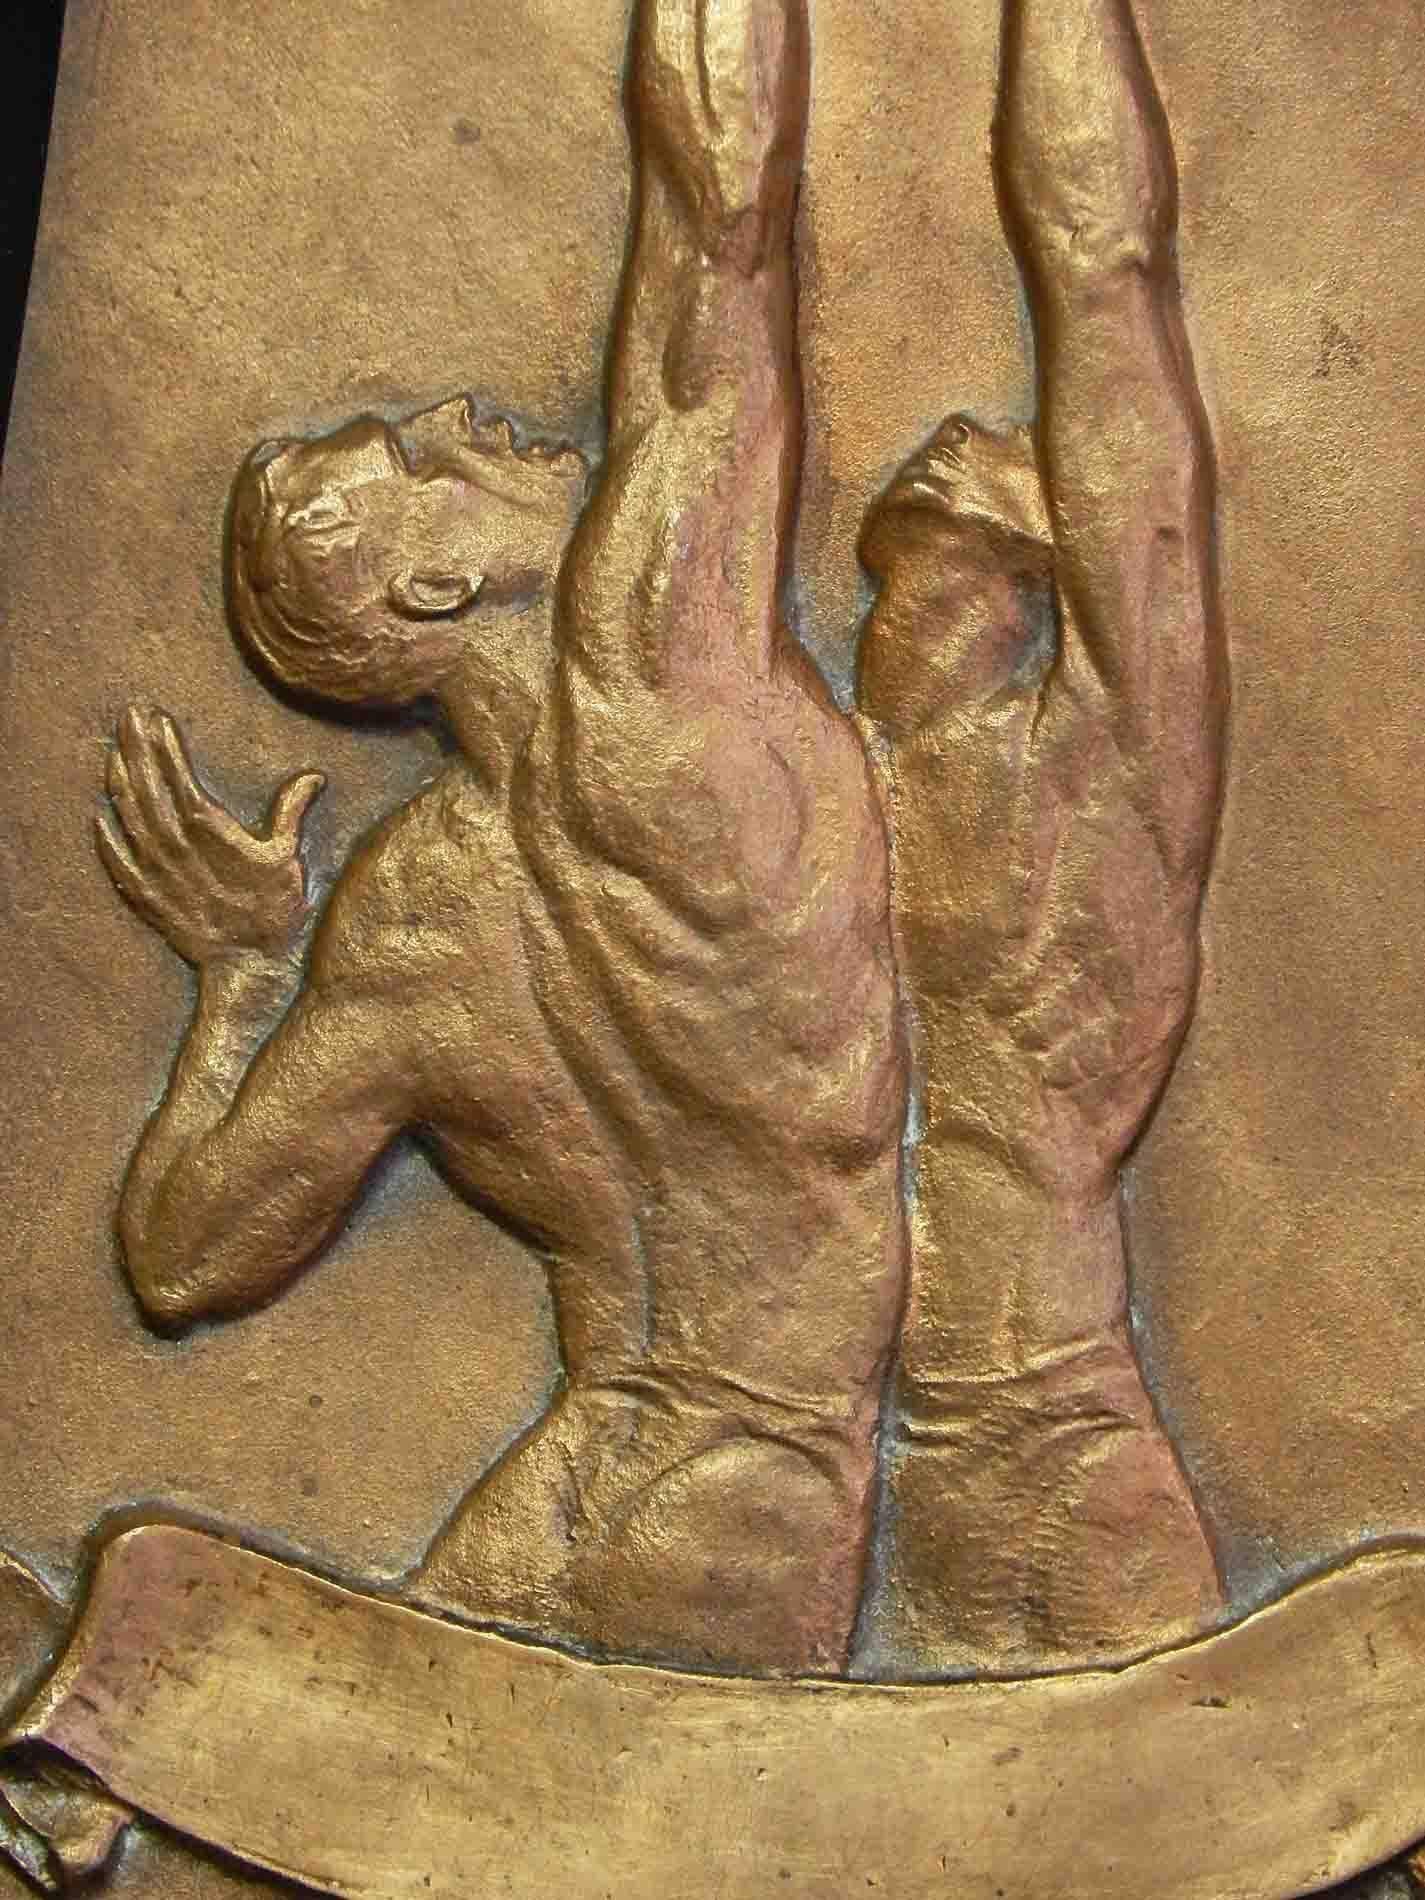 Perhaps because it depicts its figures more as Greek athletes rather than modern players, this bronze Art Deco plaque is very rare, or possibly unique. The artist, Fred Torrey, depicts a Classic jump shot, with two virtually nude basketball players